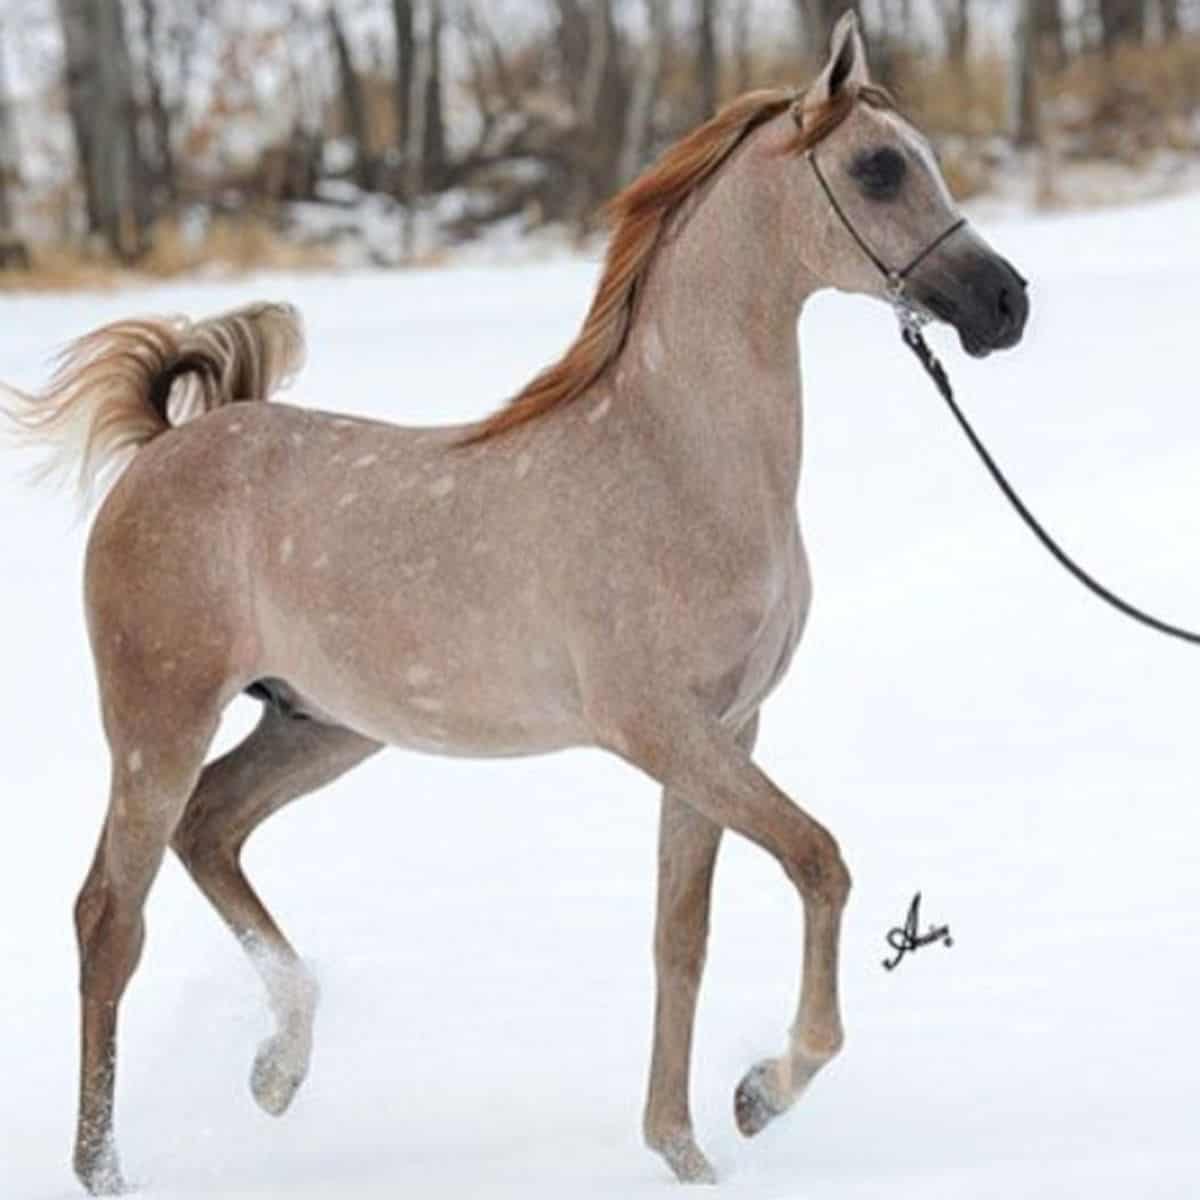 A gray-ginger foal with a ginger mane walks on the snow-covered ground.